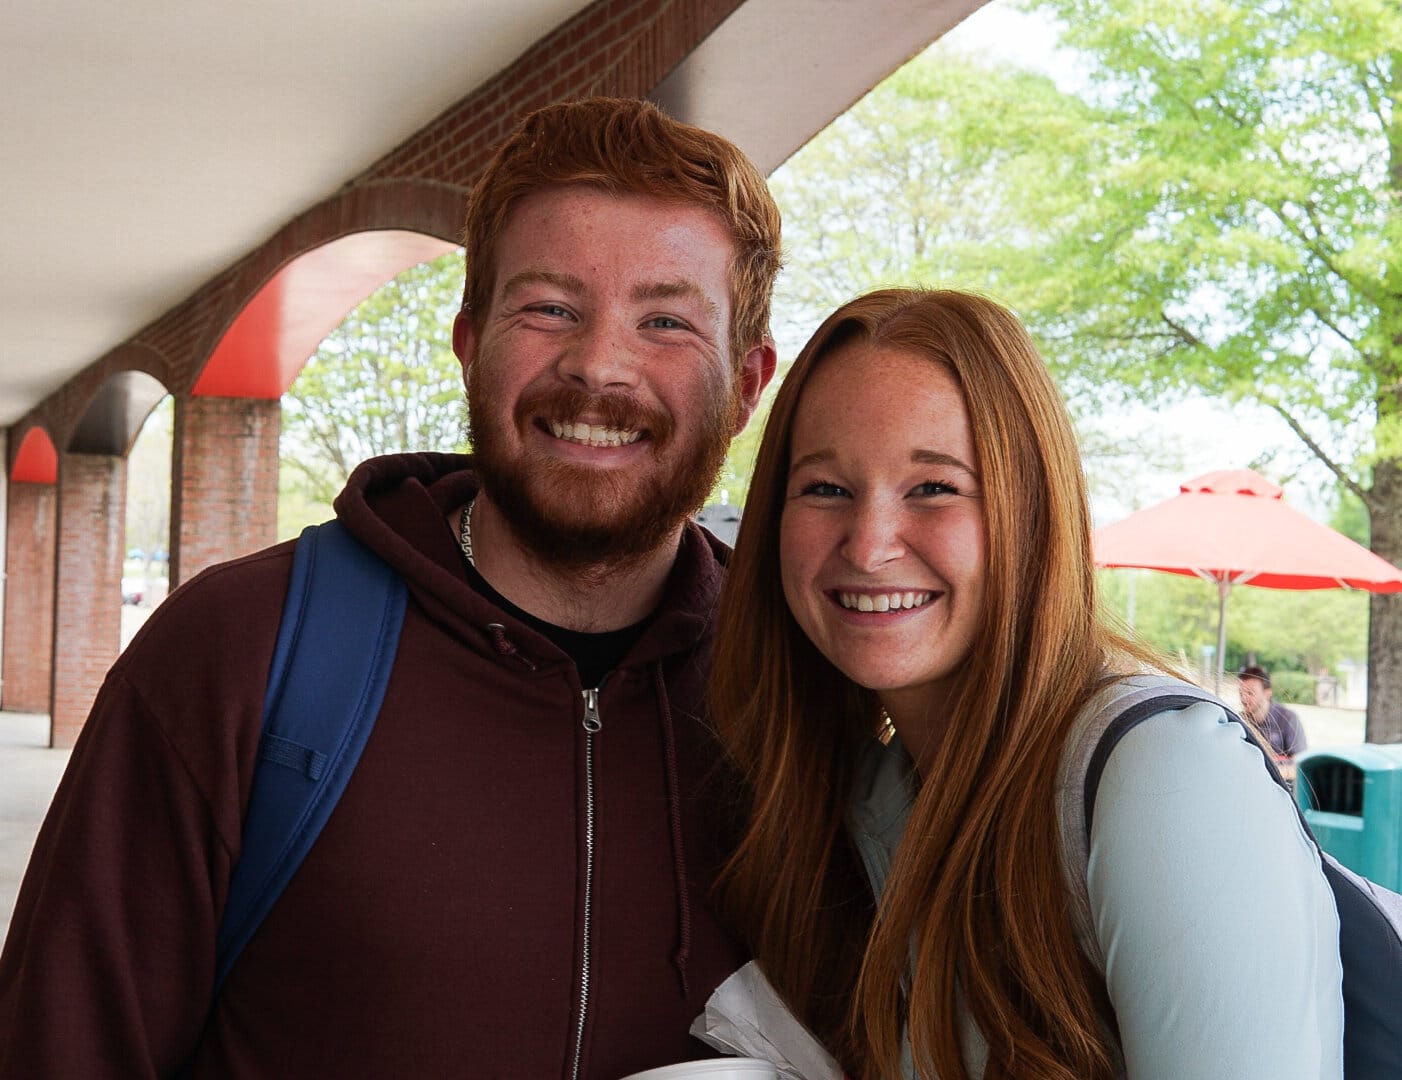 Sophomore Christian studies major Connor Hampton and freshman health science major Mackenzie Sturgill take a break to get some treats from the table and catch up on the days occurrences.